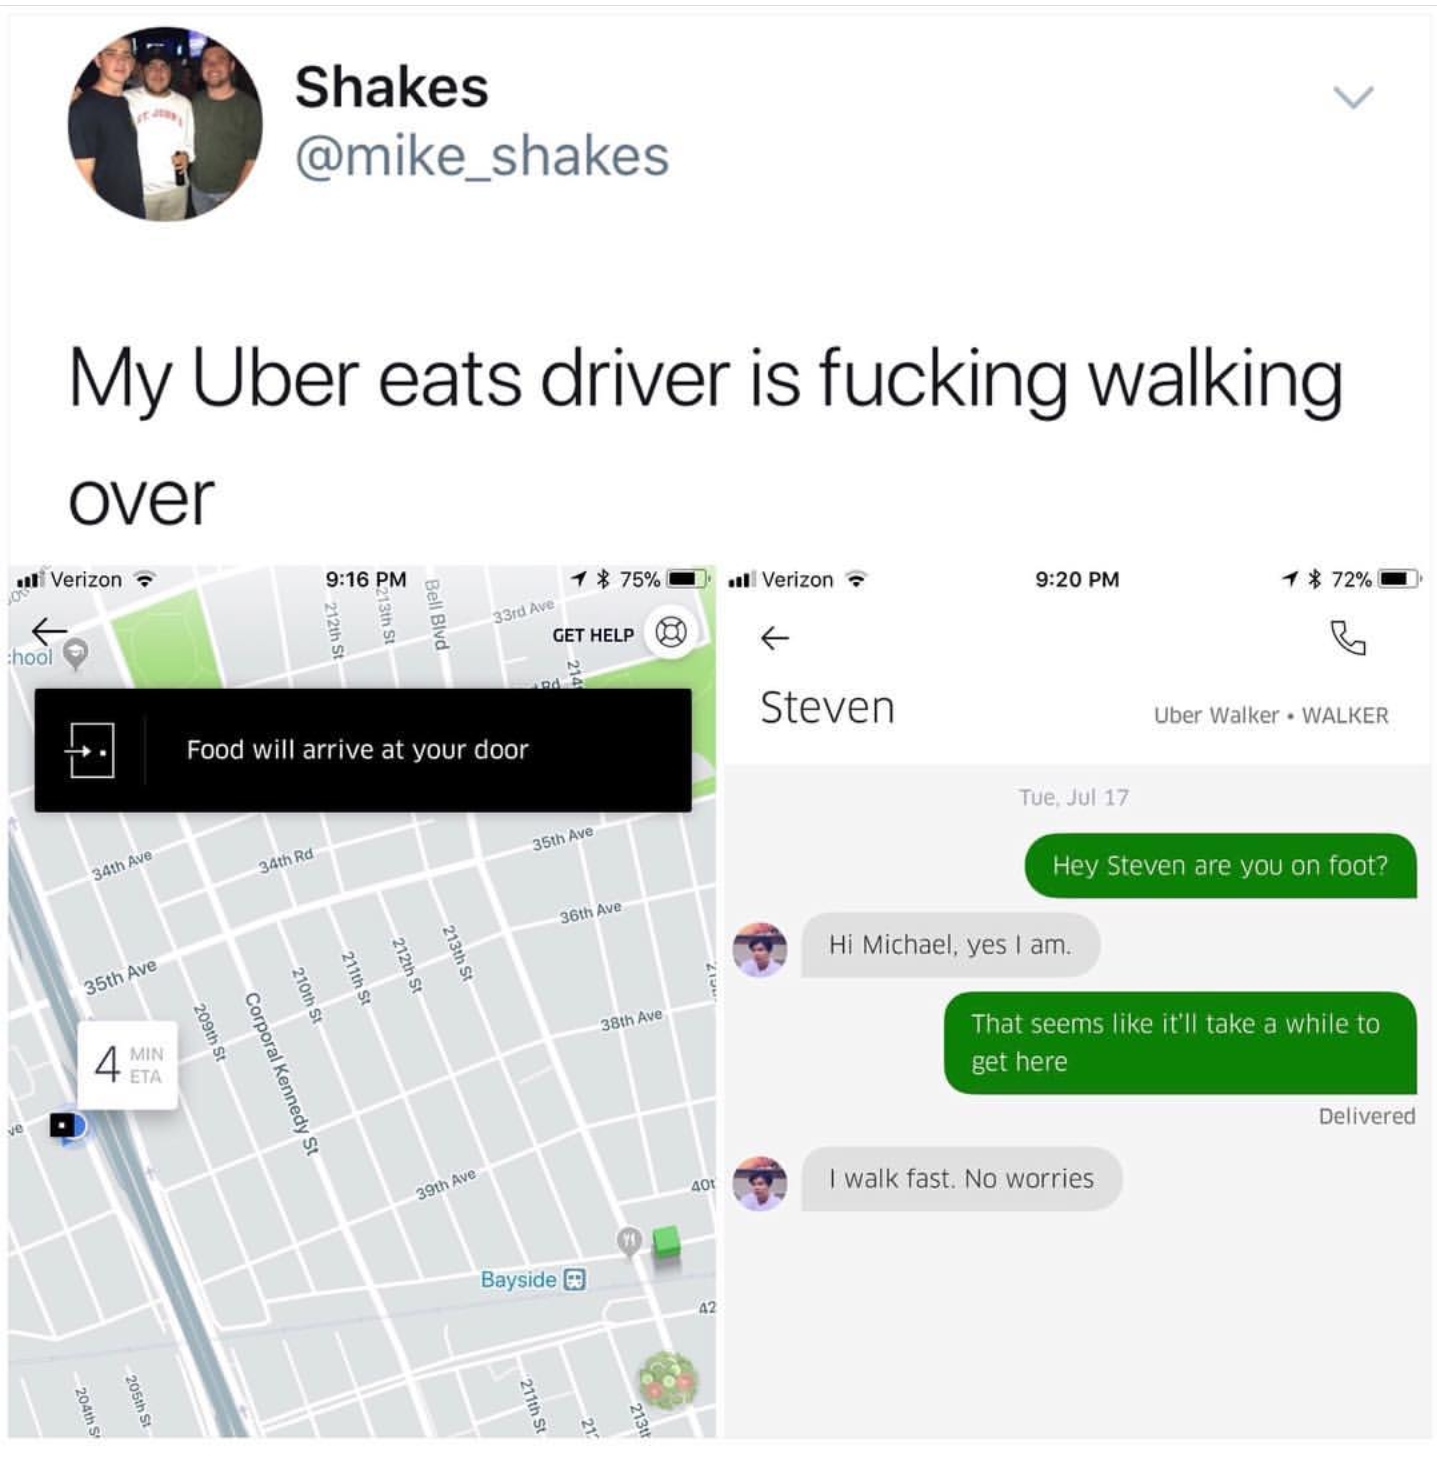 walk fast no worries - Shakes My Uber eats driver is fucking walking over Verizon Verizon $728 75% Get Help ho Steven Uber Water Walker Food will arrive at your door Tue Jul 12 Hey Steven are you on foot? H. Michael, yes I am That seems it'll take a while